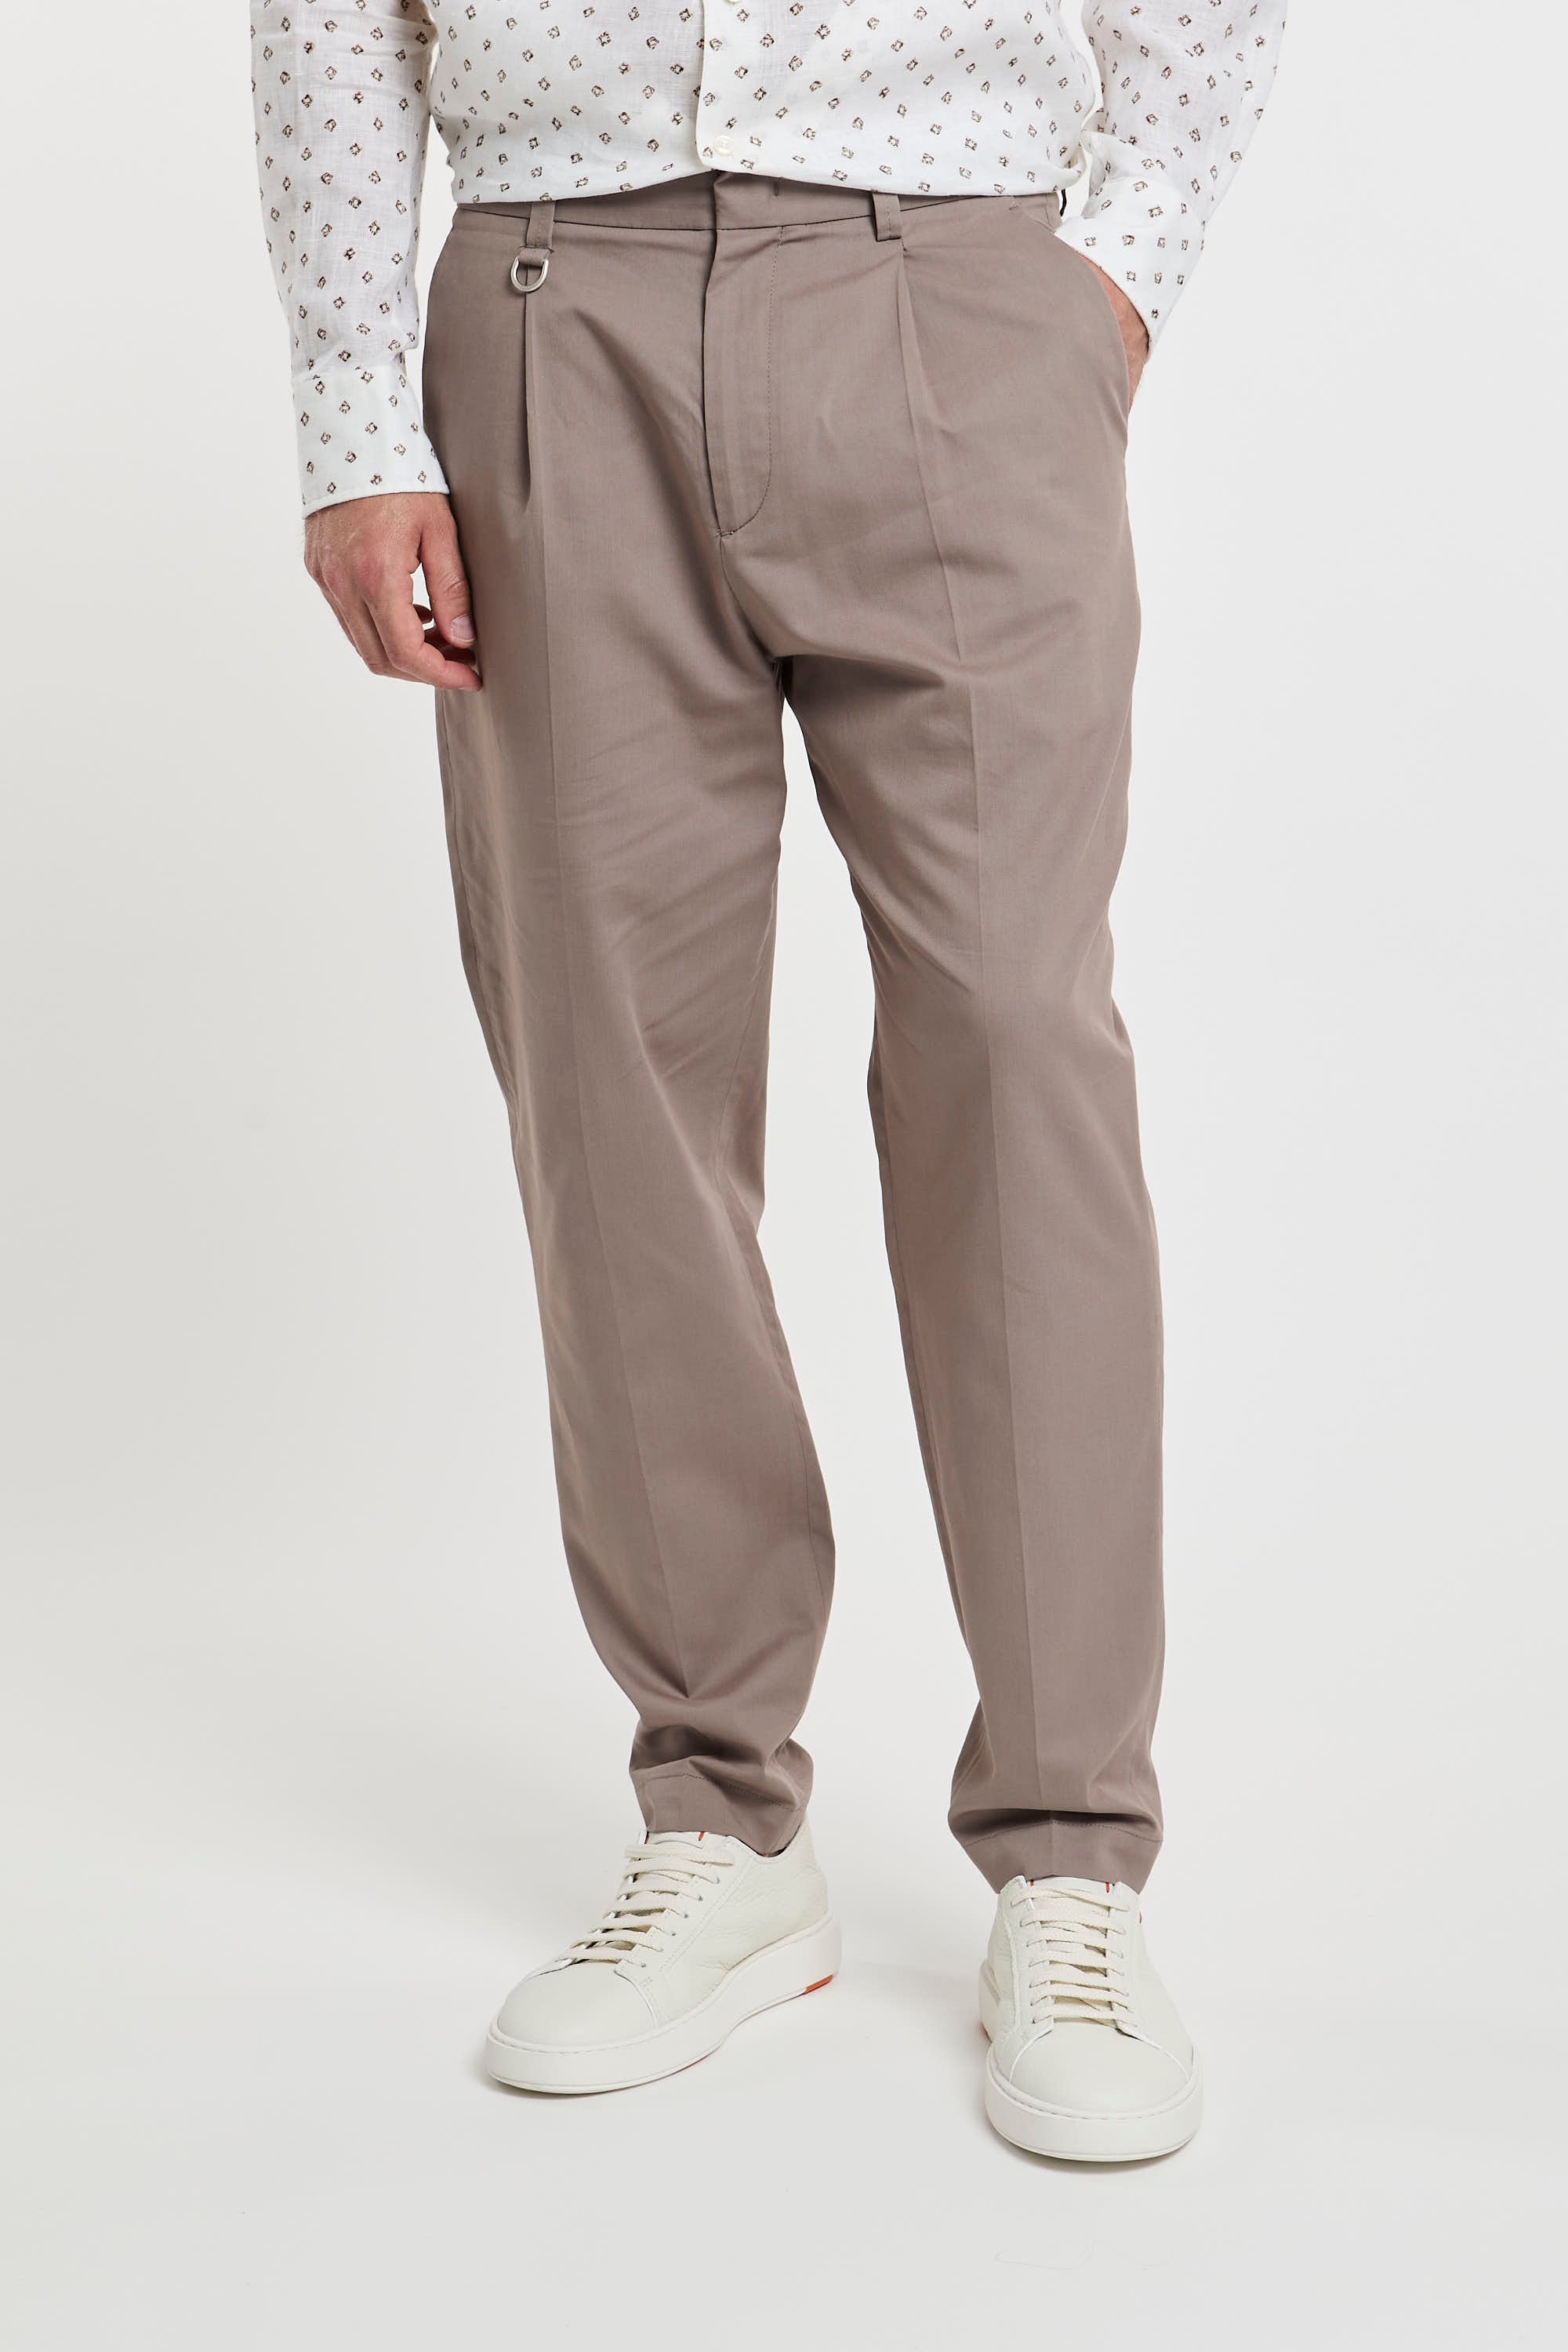 Paolo Pecora Cotton Blend Chino Trousers in Taupe-1